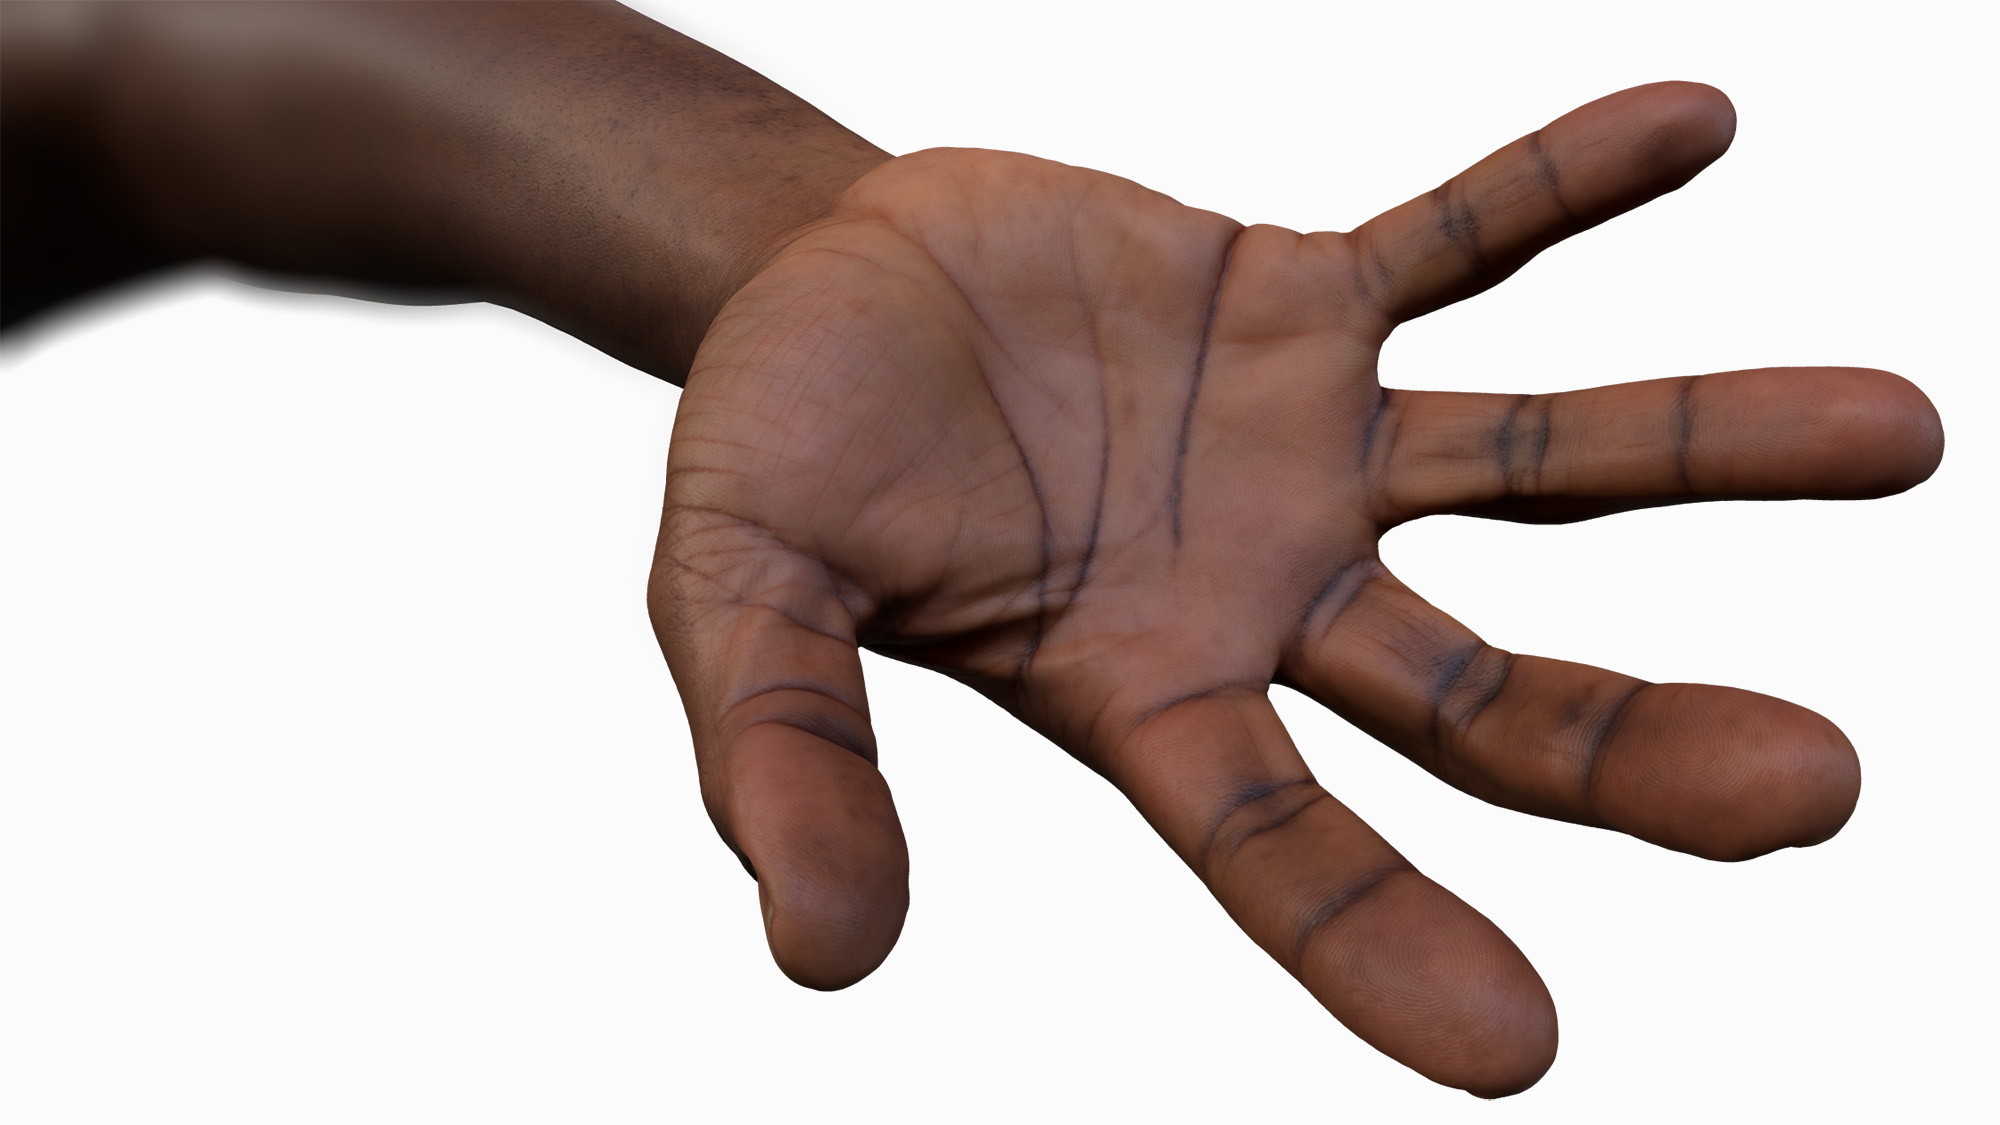 Texture mapped Male Hand